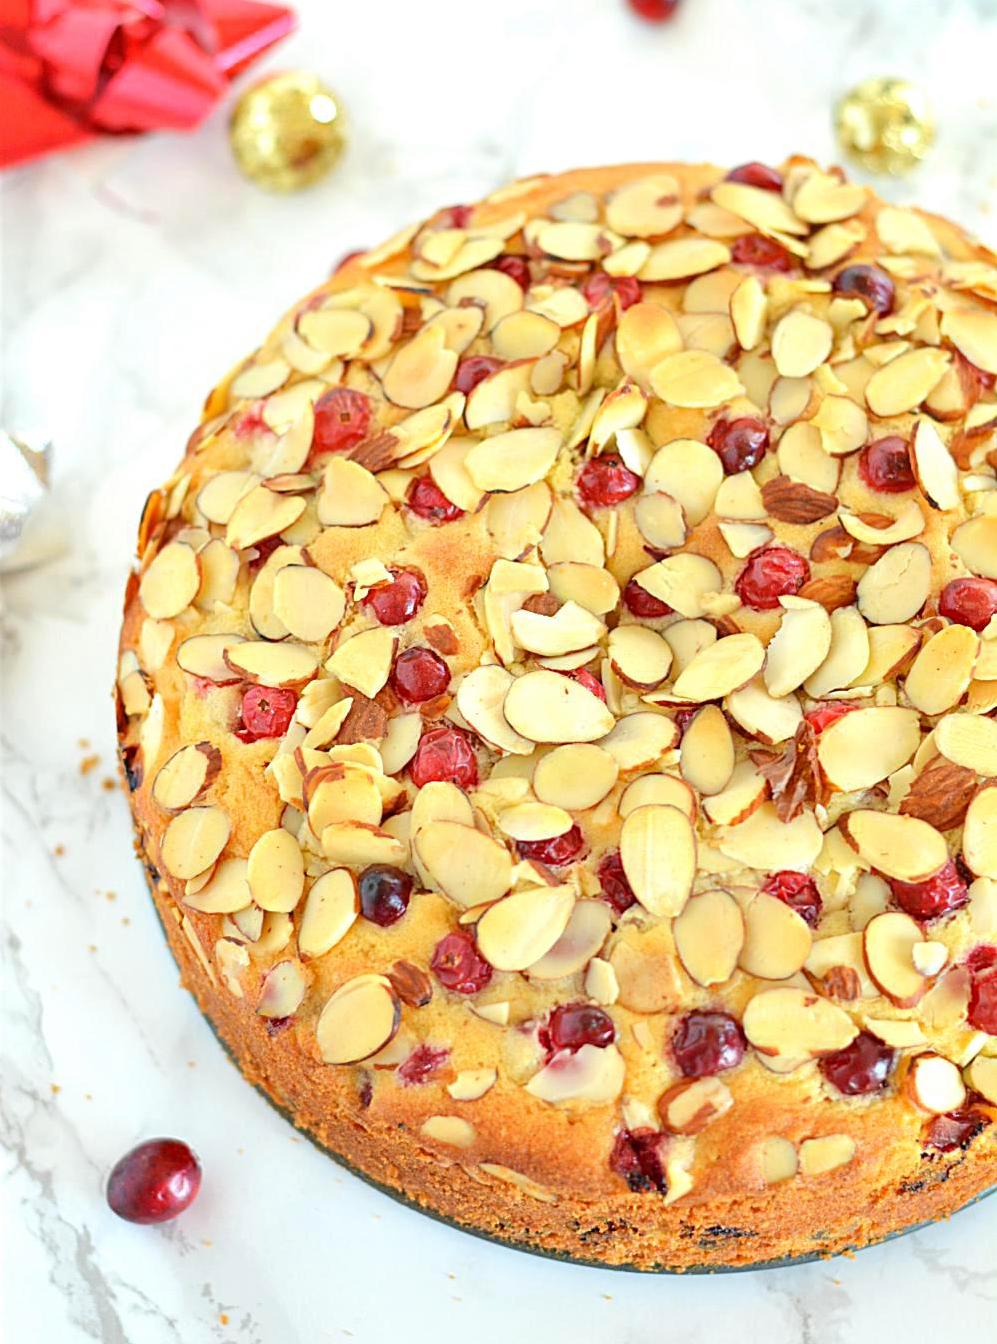  Every bite is filled to the brim with cranberries and almonds.